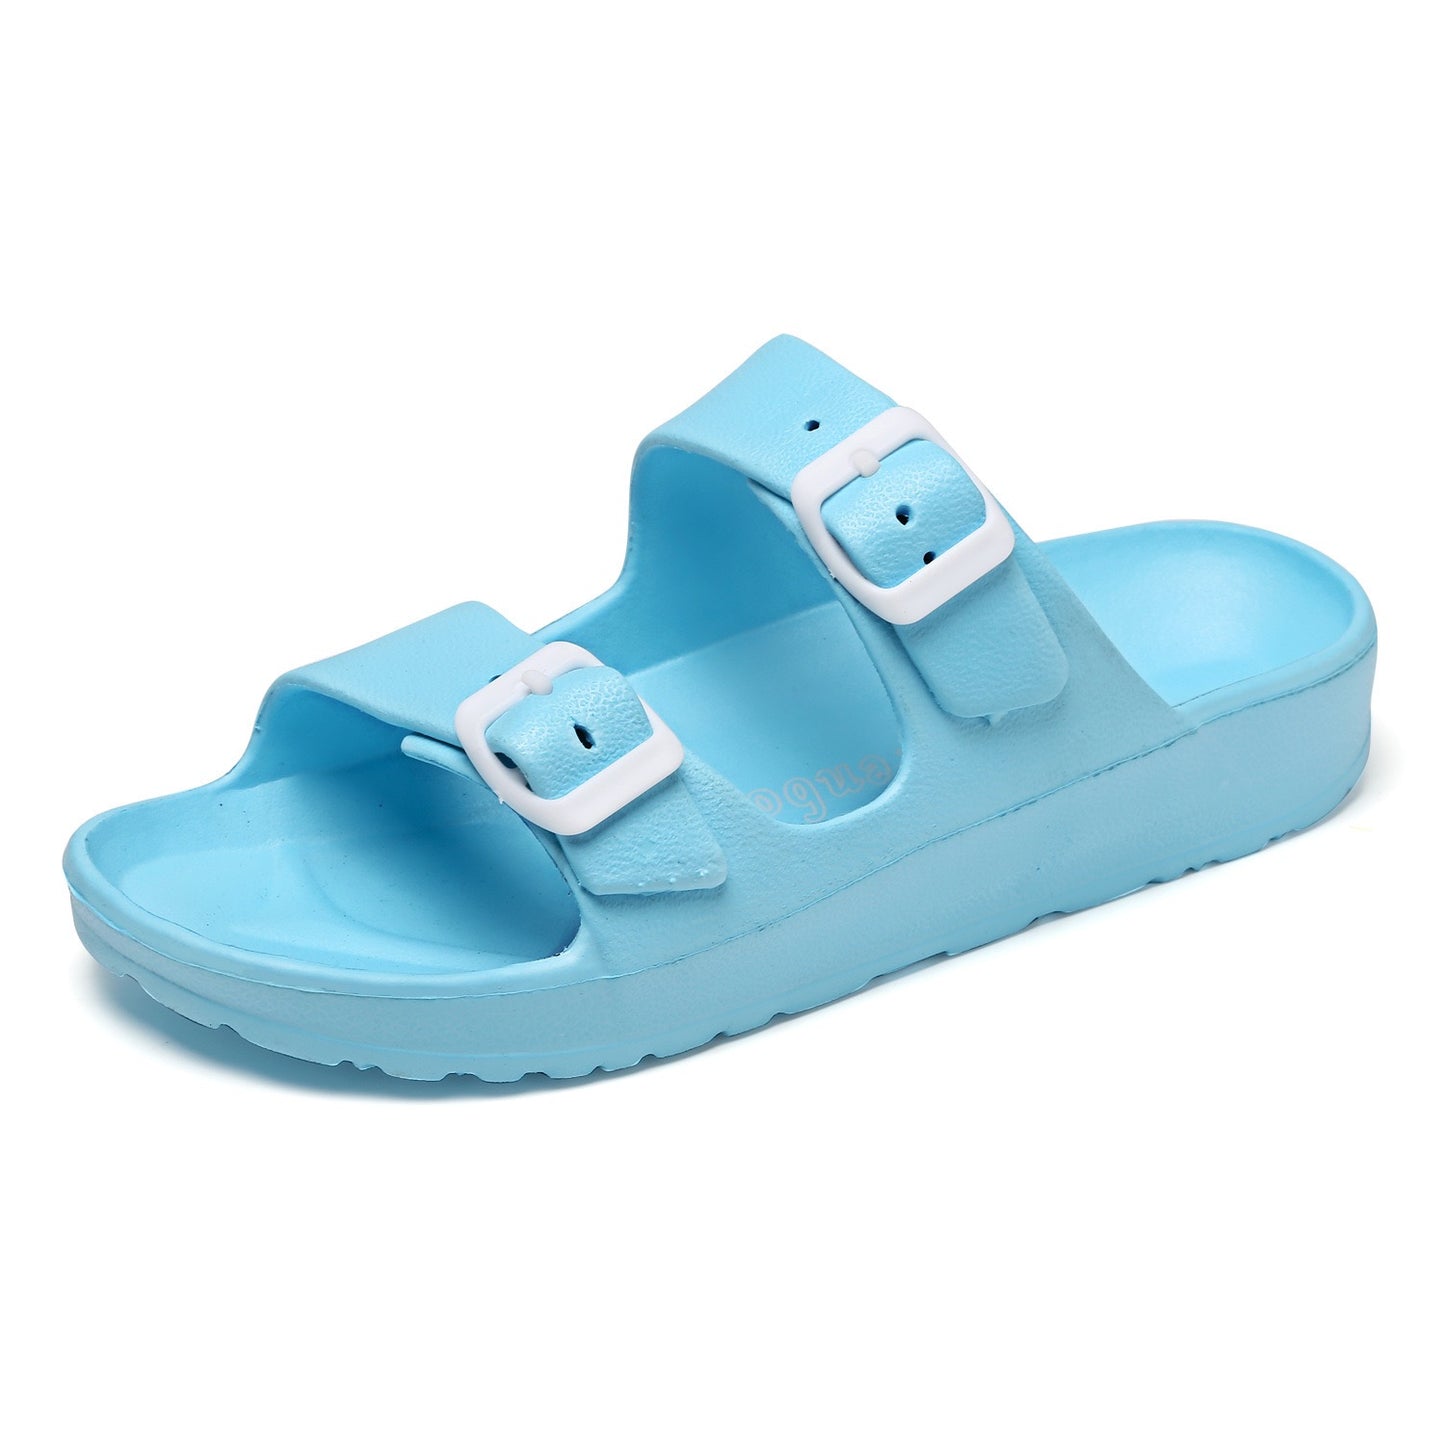 New Summer Women's Sandals, Soft And Comfortable